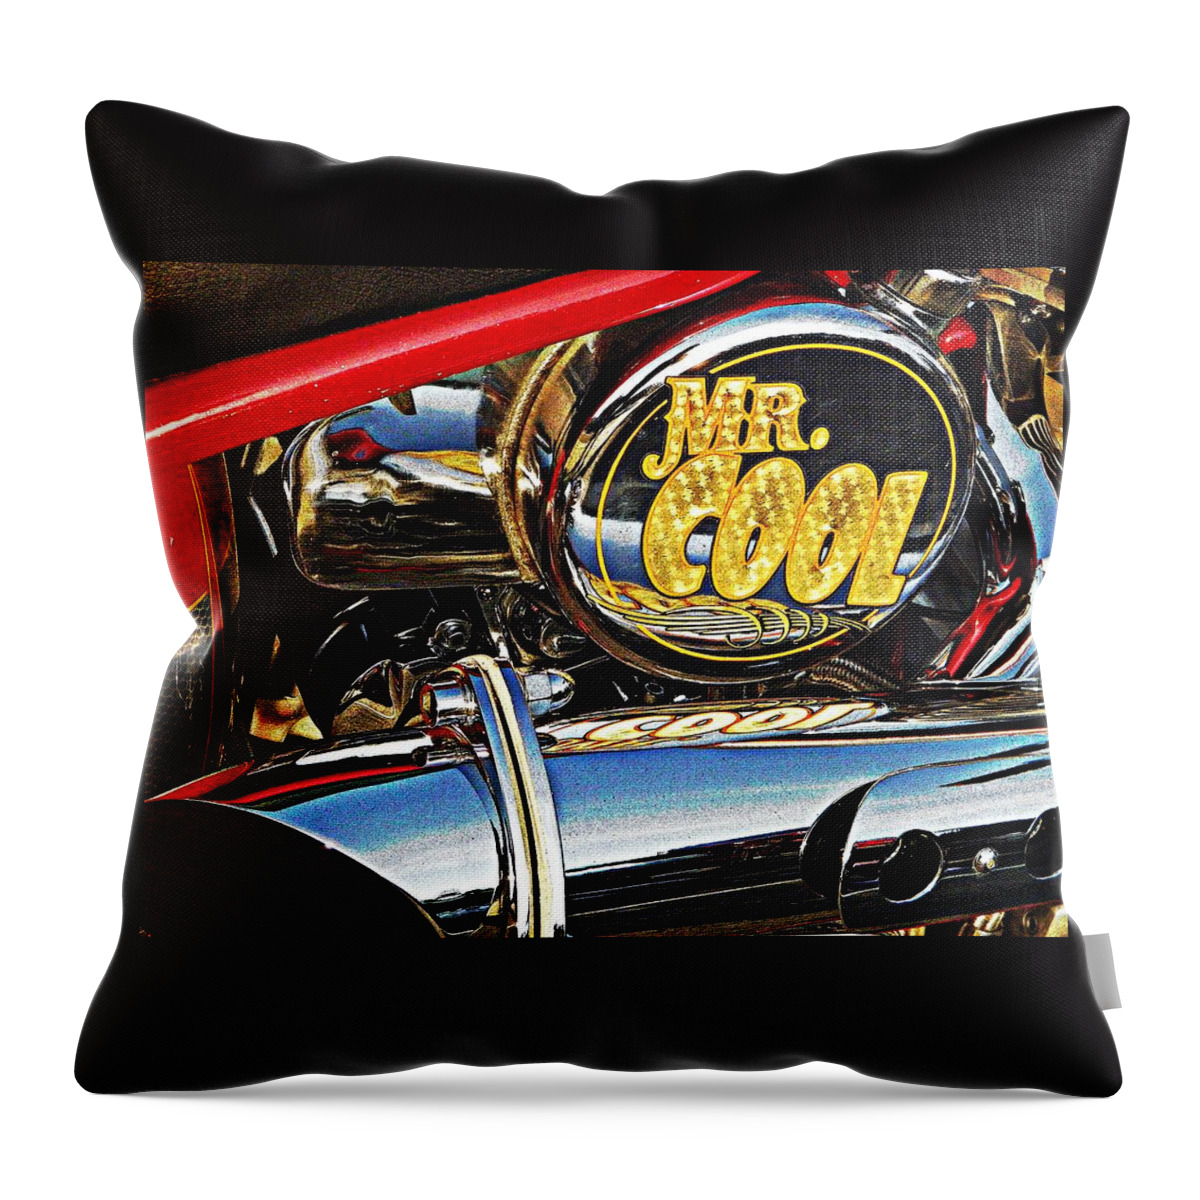 Vehicle Throw Pillow featuring the photograph Mister Cool by Chris Berry